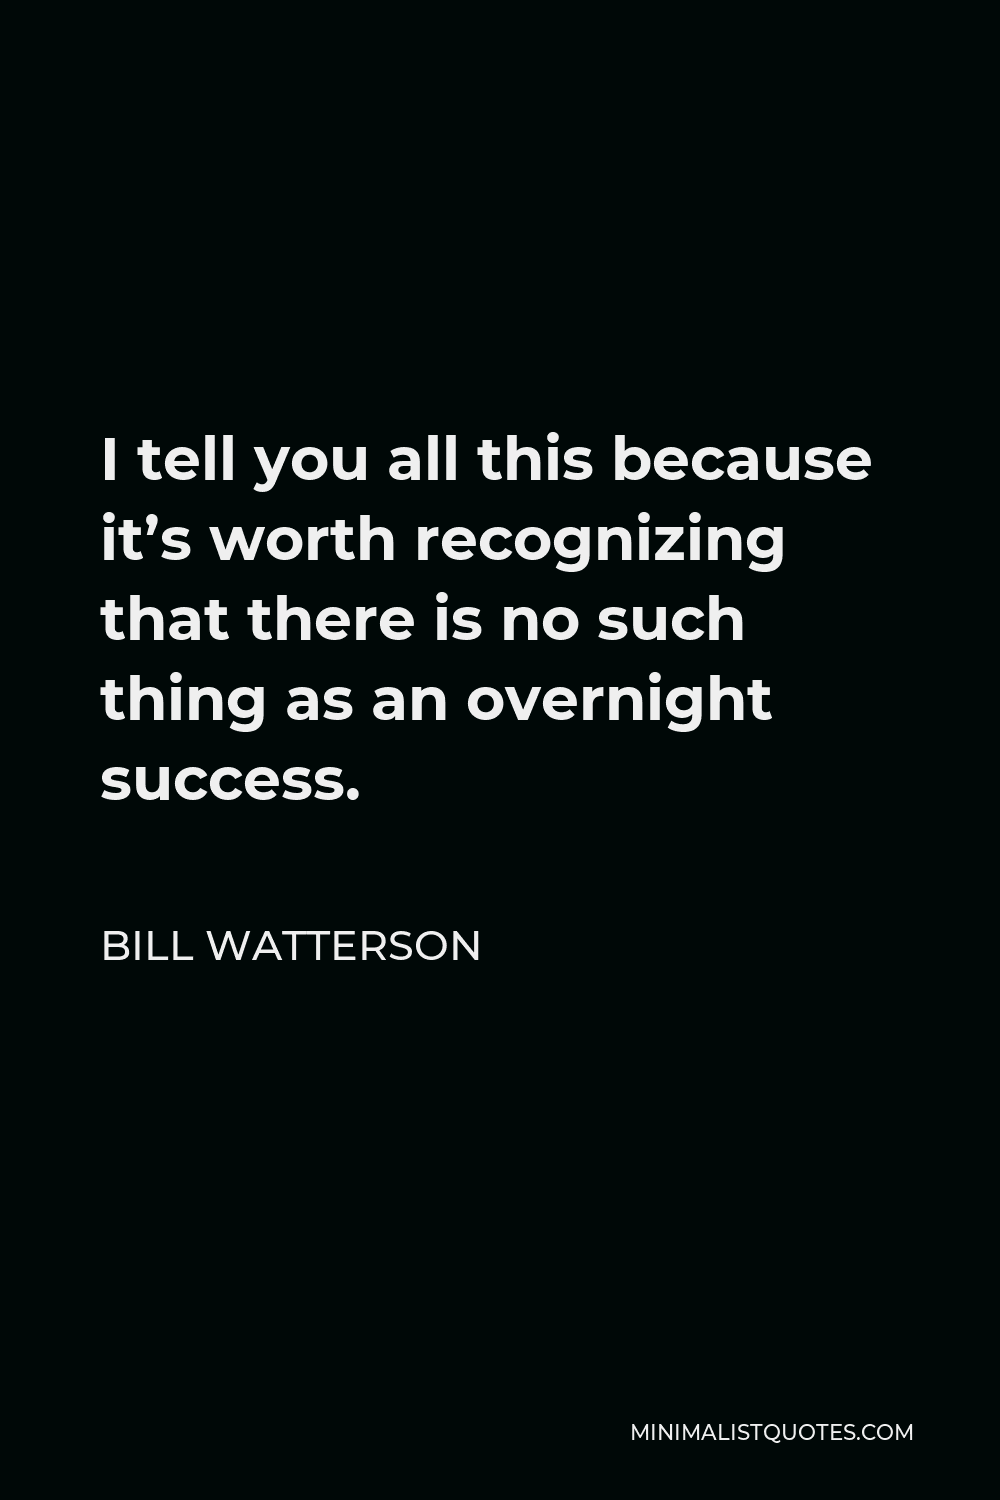 Bill Watterson Quote - I tell you all this because it’s worth recognizing that there is no such thing as an overnight success.